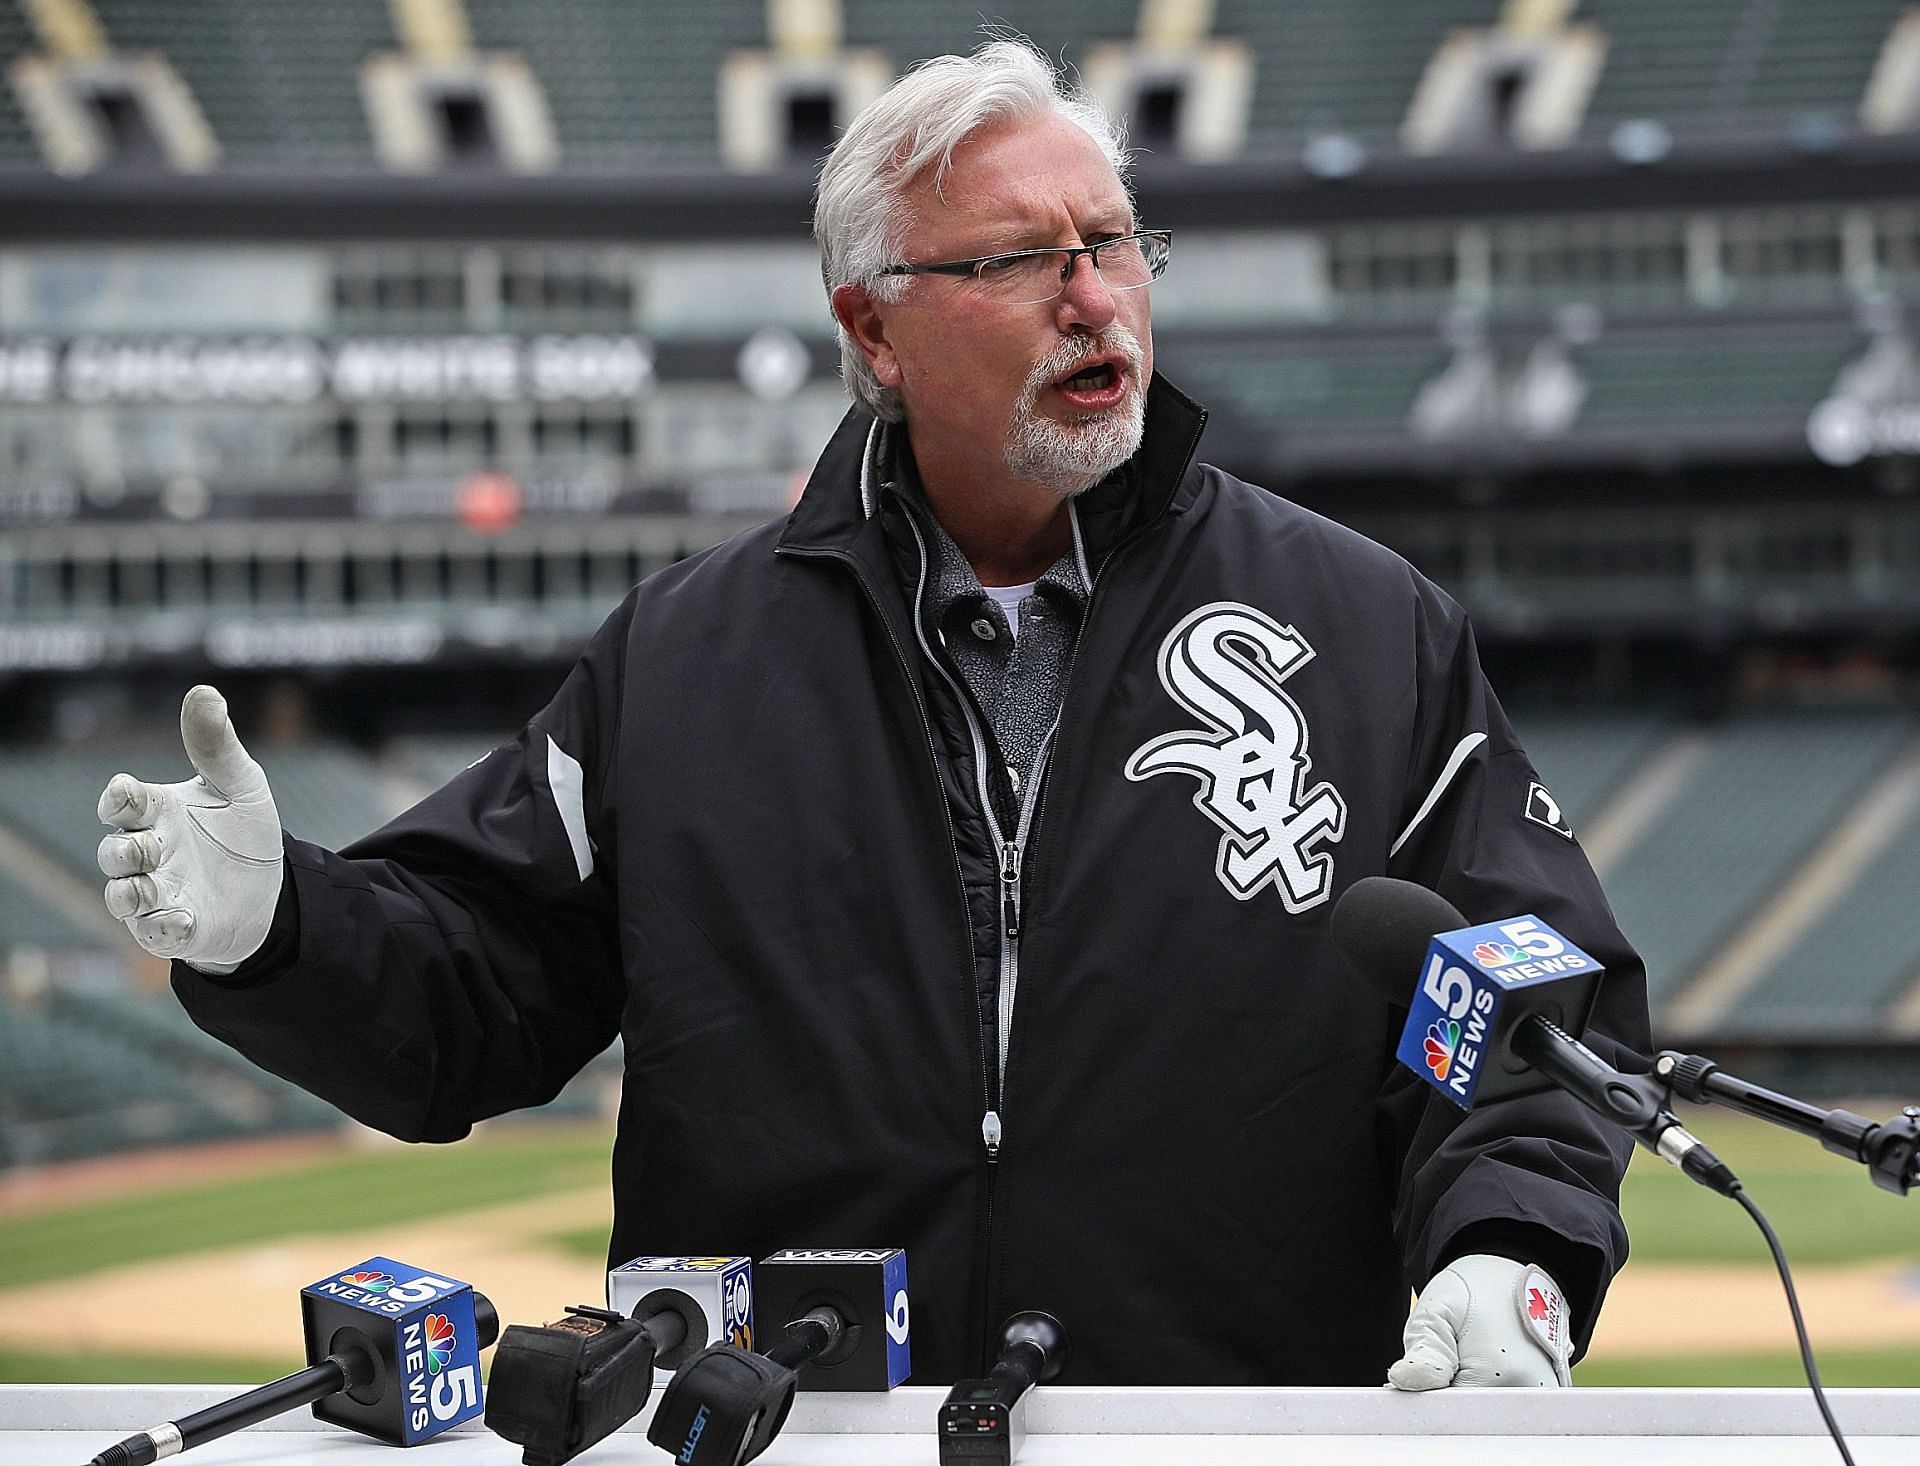 Chicago White Sox Ambassador Ron Kittle Participates In American Red Cross Blood Drive At Guaranteed Rate Field: CHICAGO, ILLINOIS - MAY 08 (Photo by Jonathan Daniel/Getty Images)